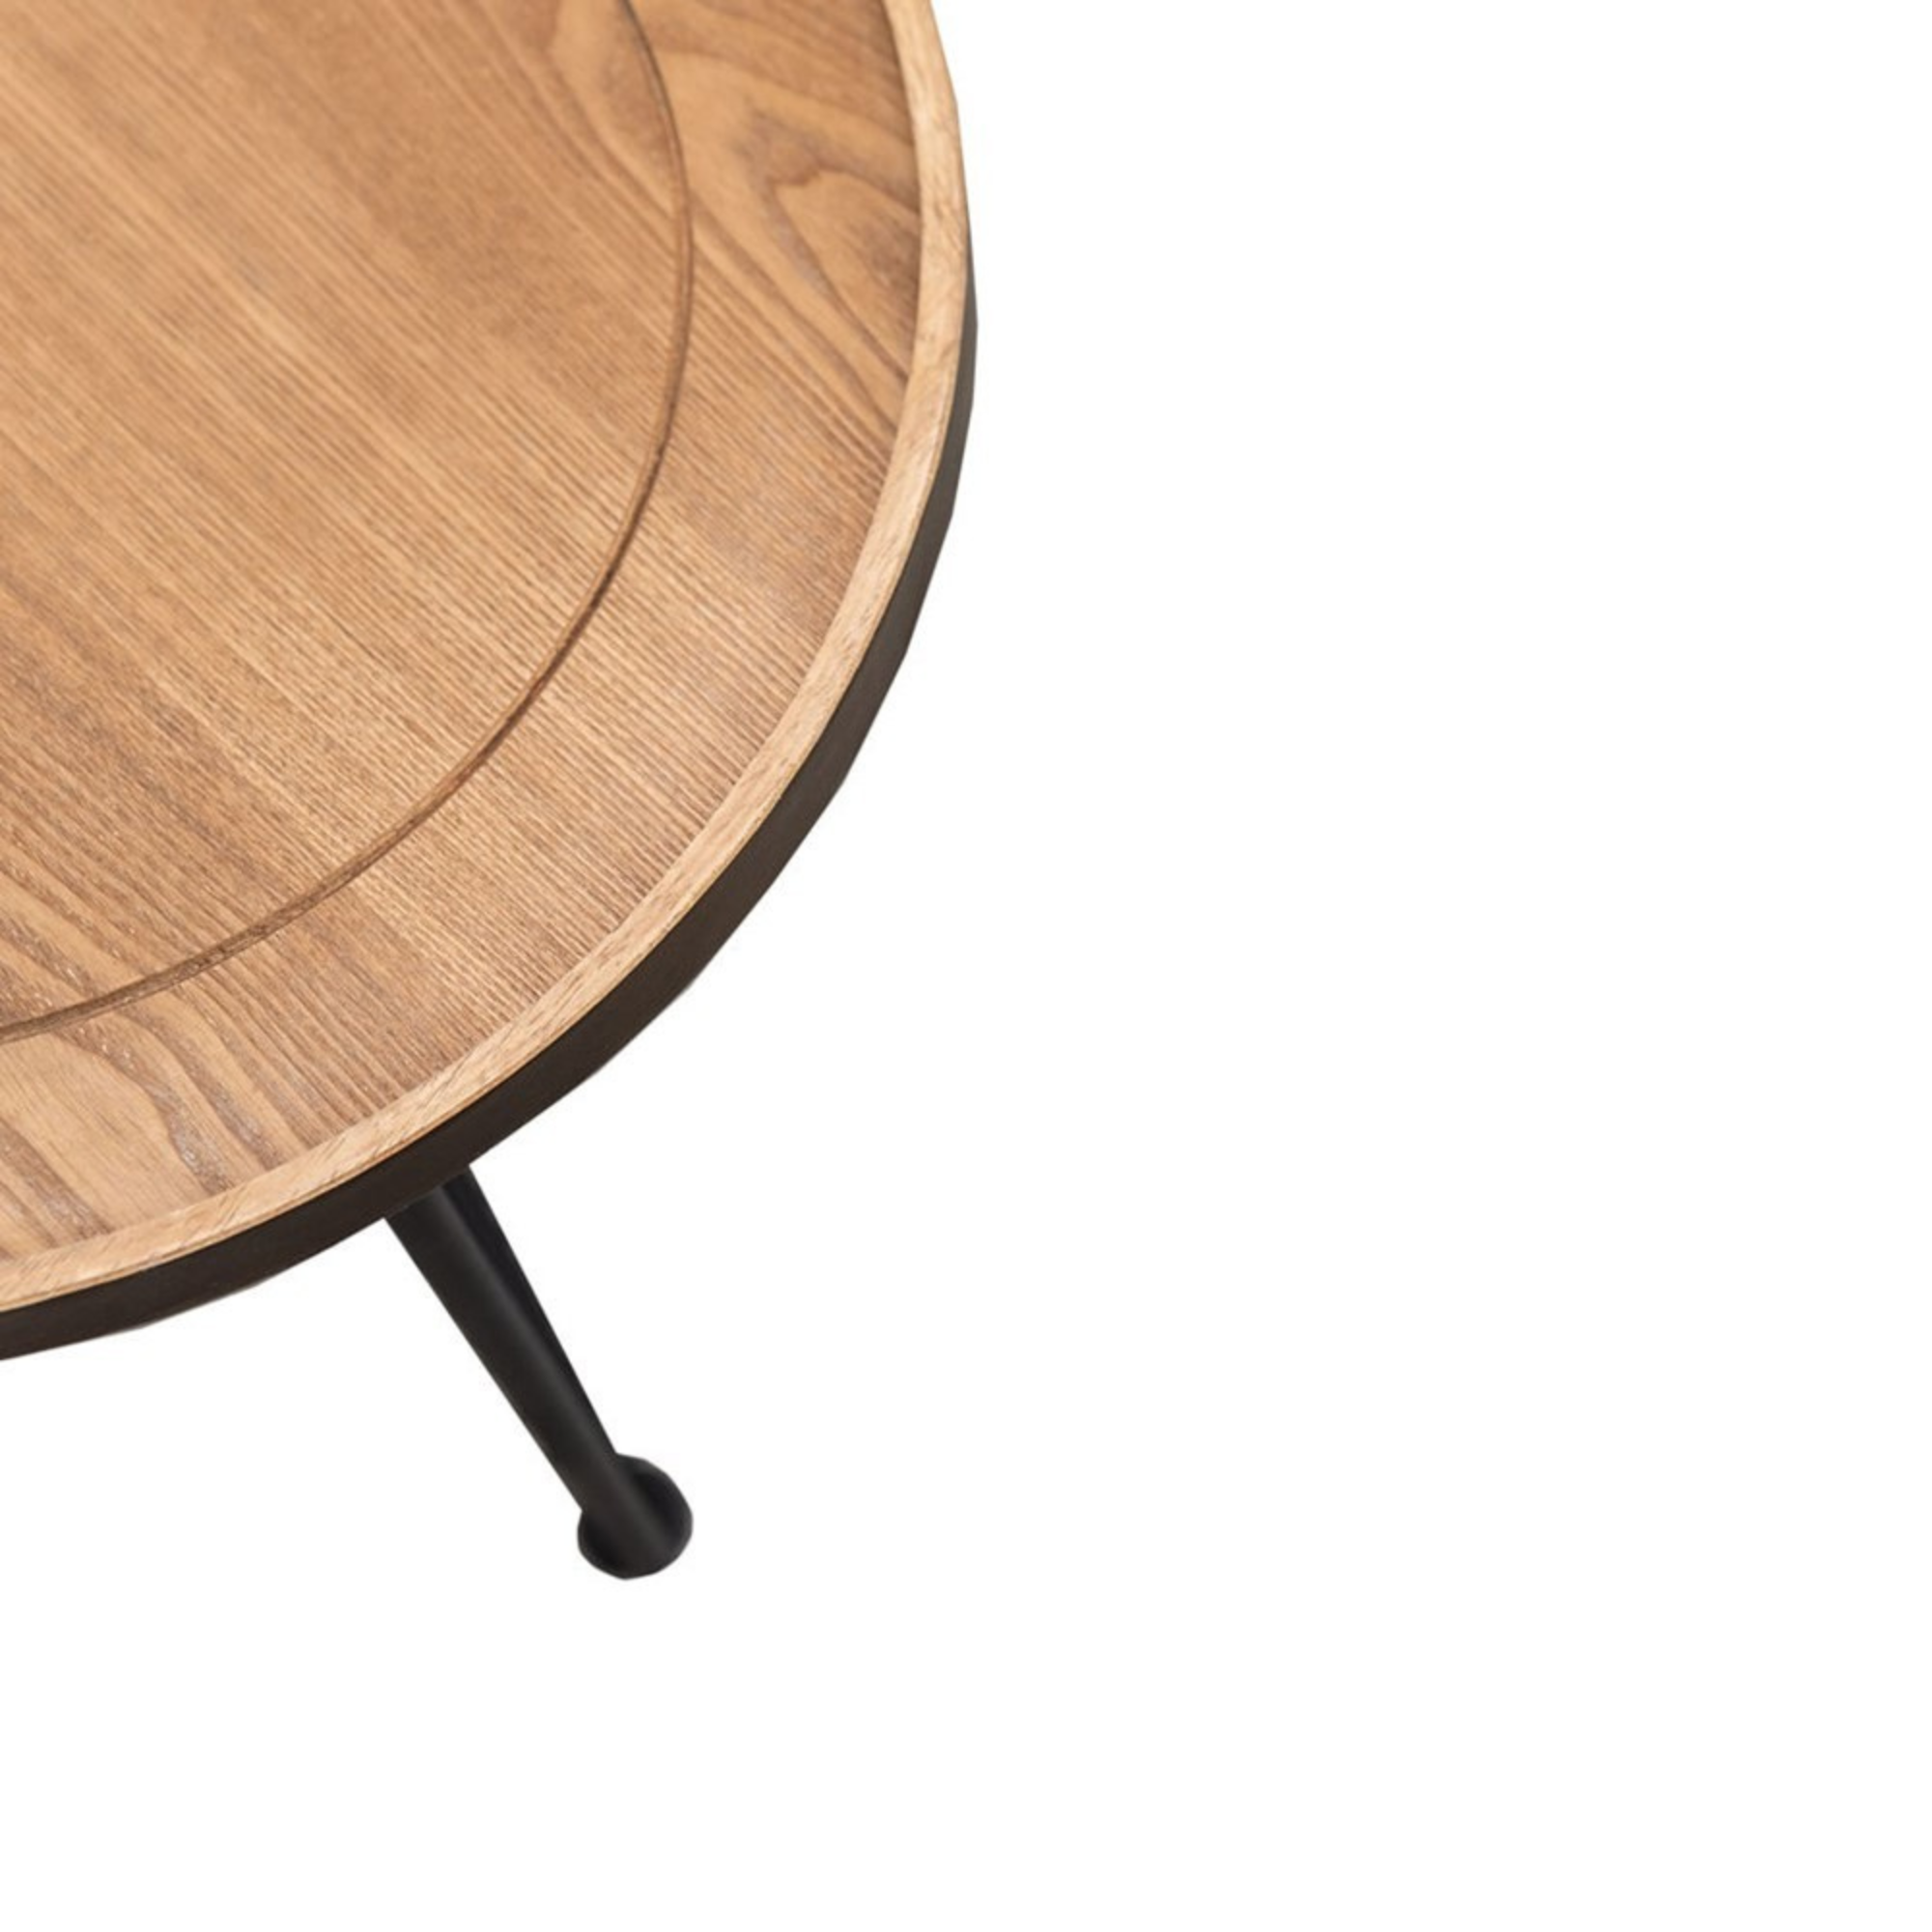 HAYWOOD ROUND SIDE TABLE | 2 COLOURS